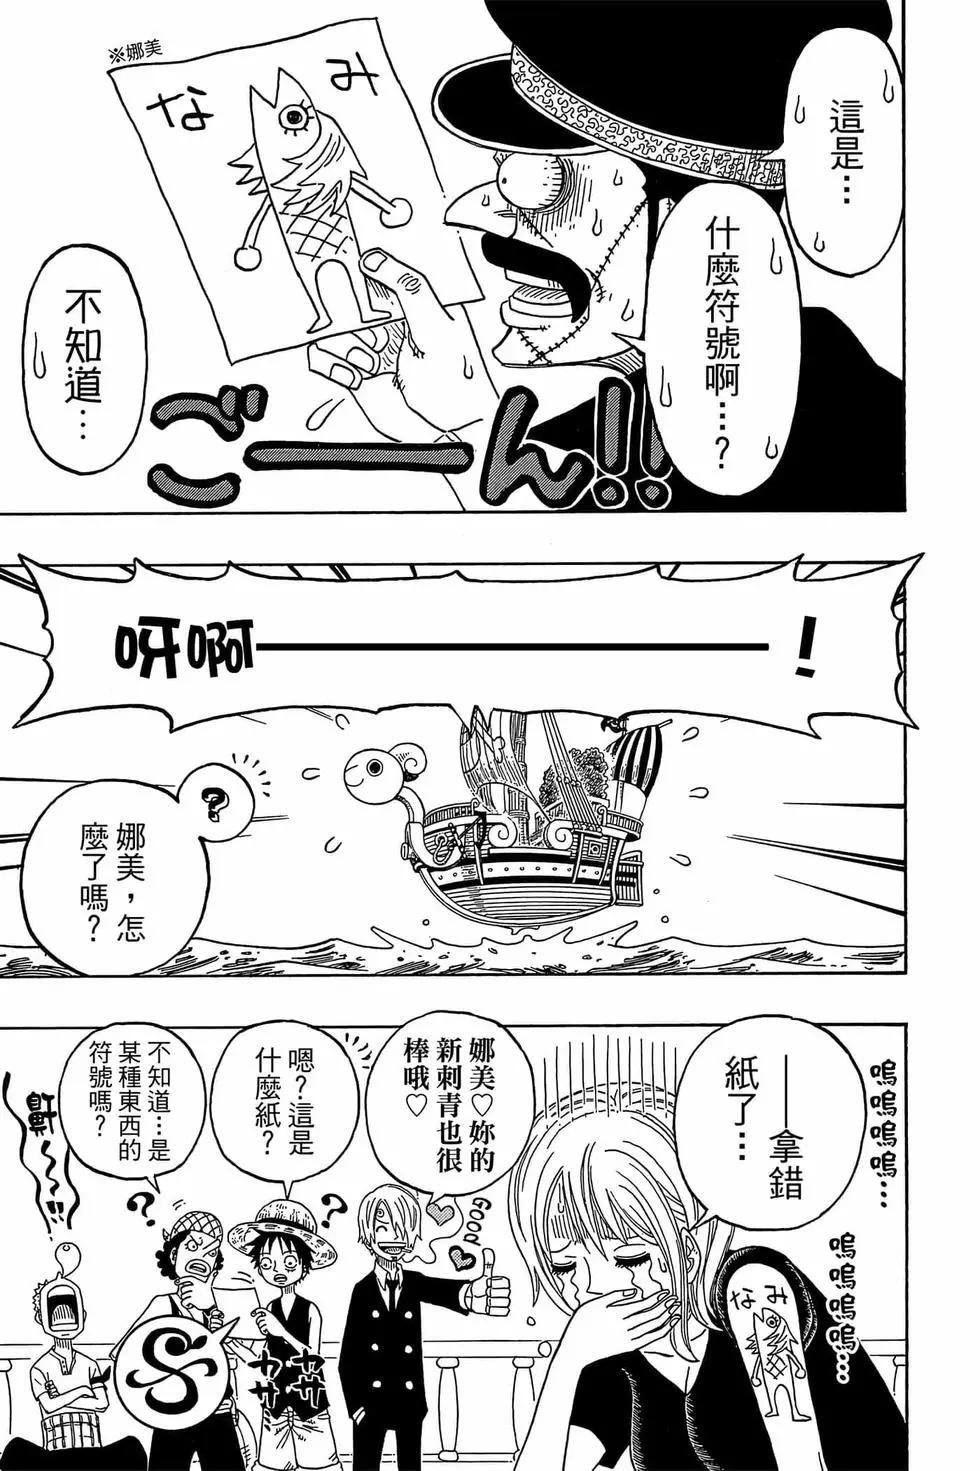 One piece party - 第03卷(1/4) - 8